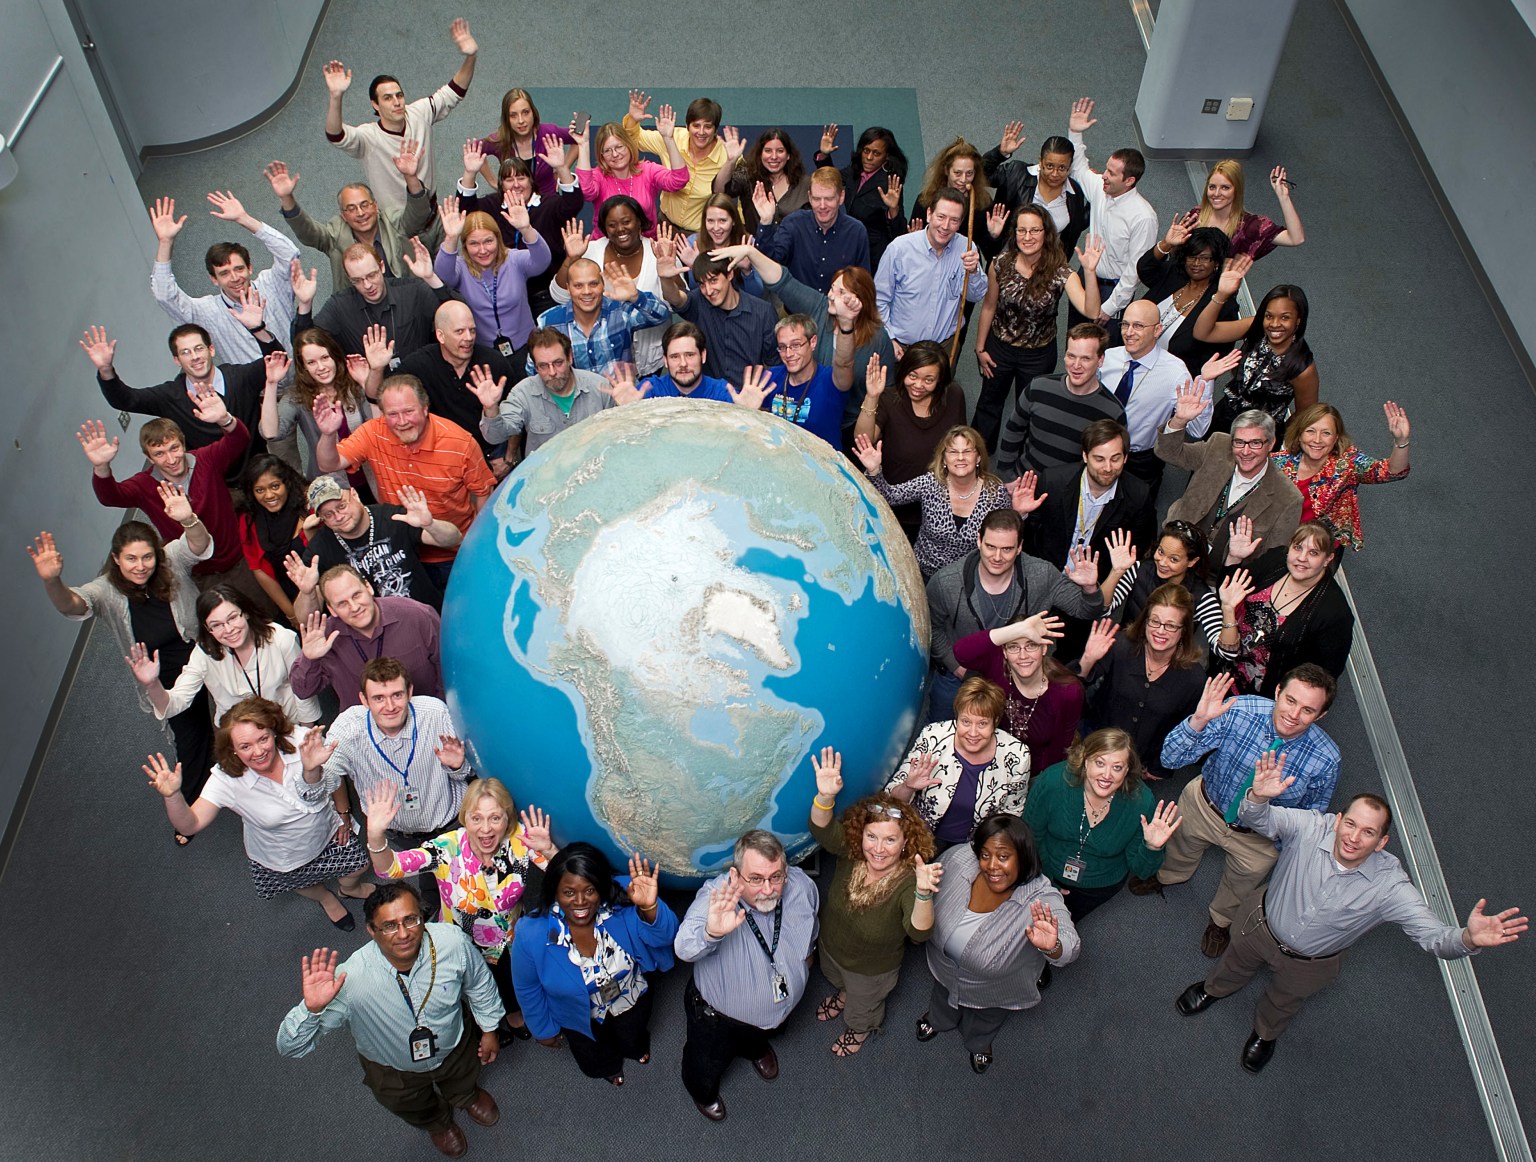 group photo of JSC employees around earth sculpture